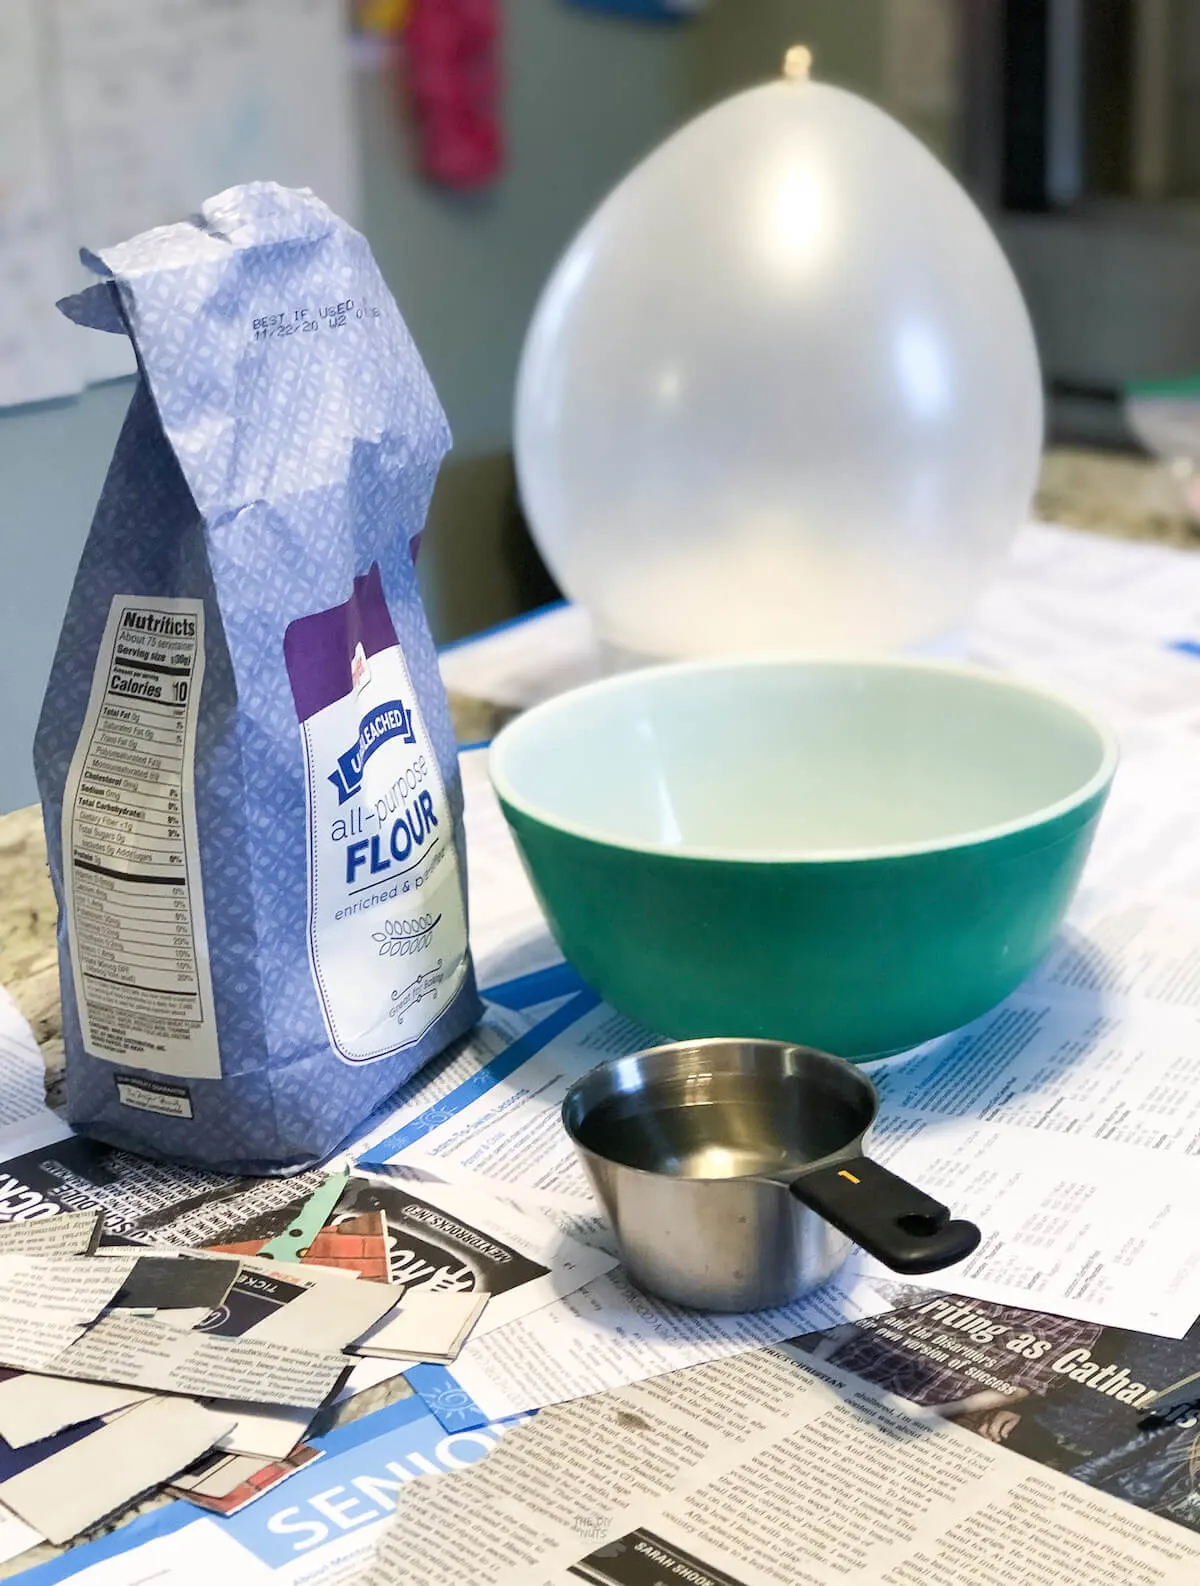 flour, balloon, bowl, measuring cup filled with water on newspaper in kitchen.